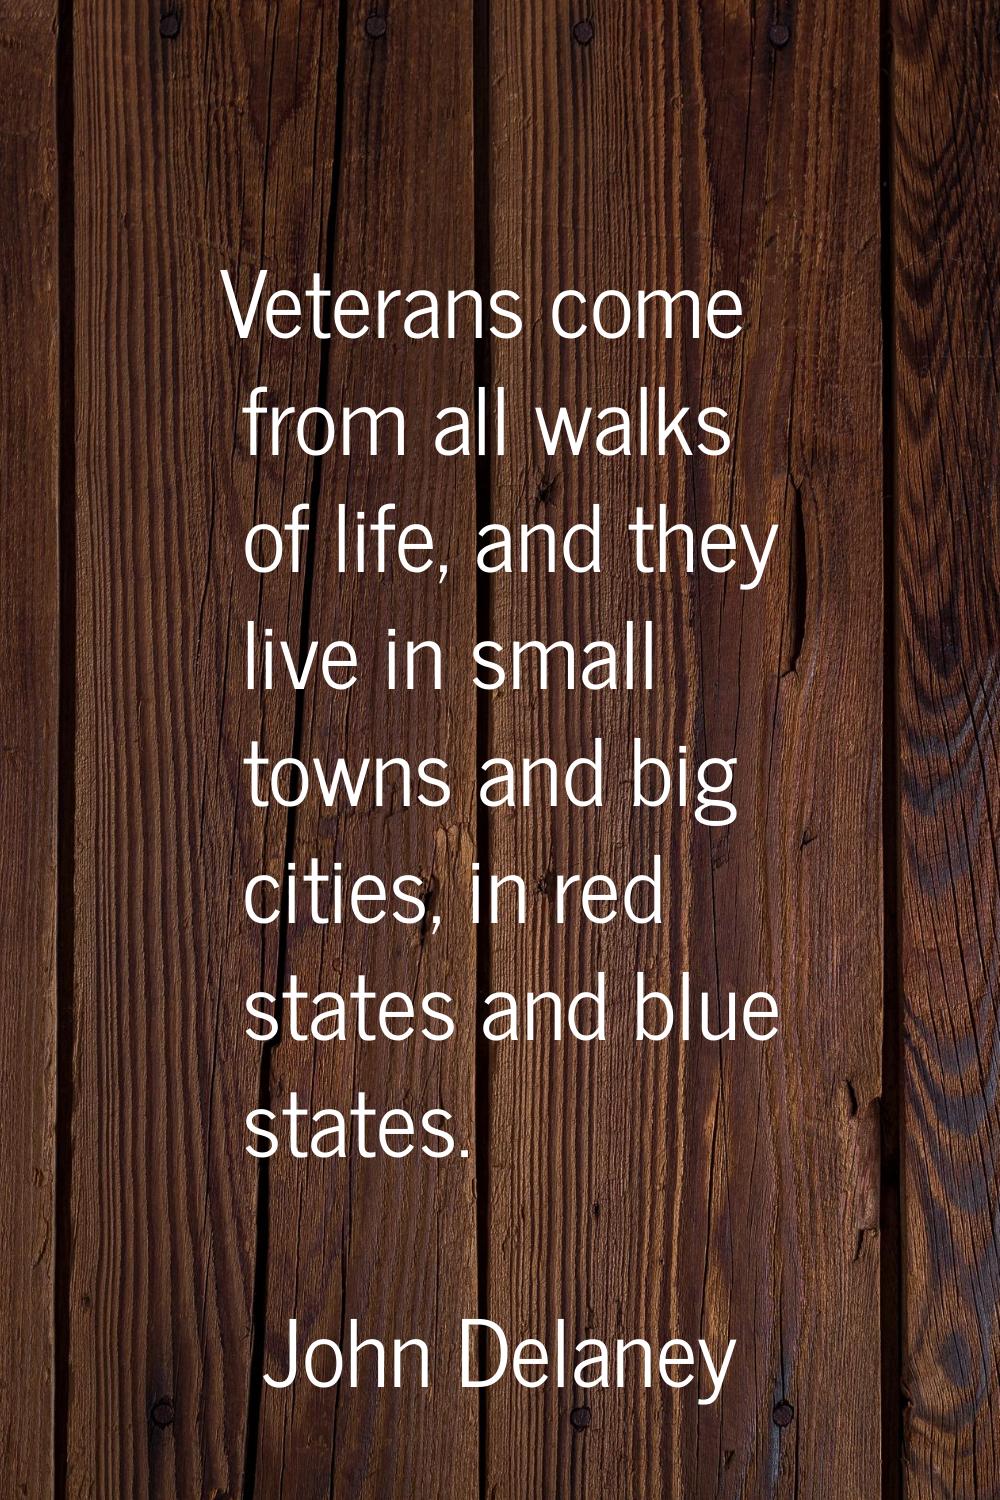 Veterans come from all walks of life, and they live in small towns and big cities, in red states an